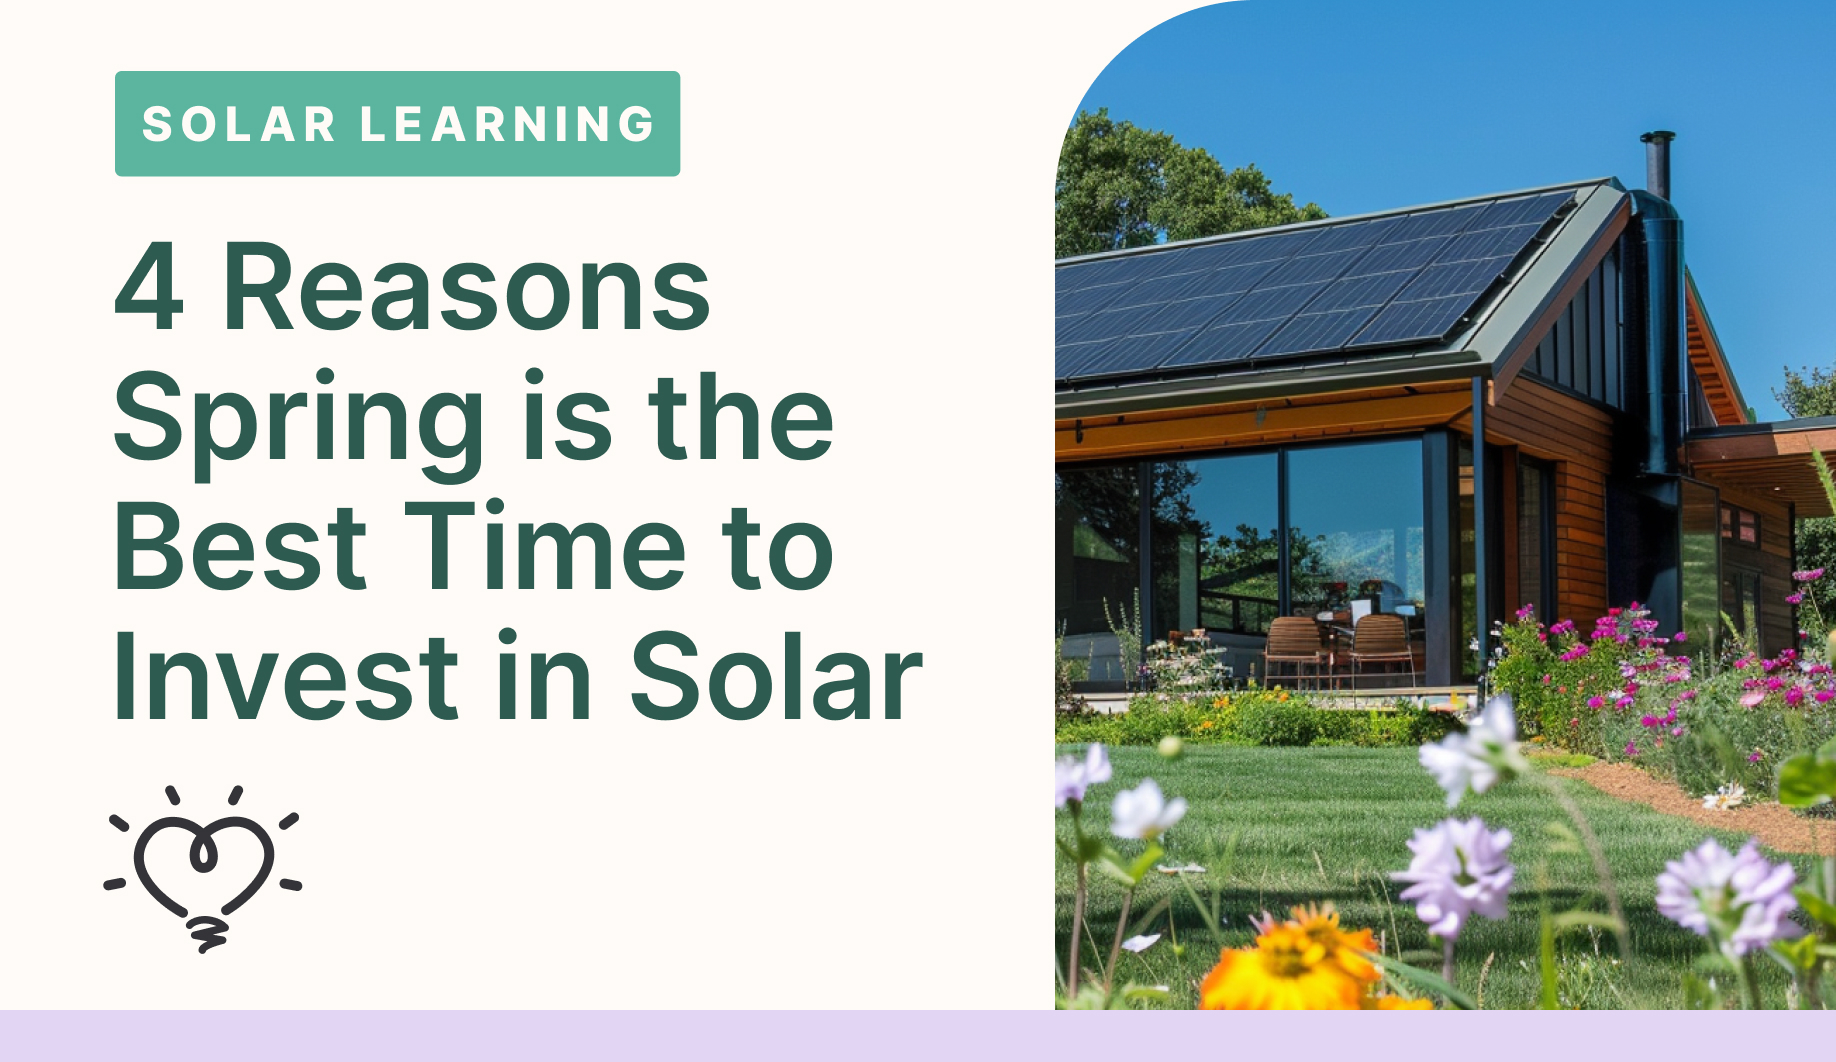 4 Reasons Spring is the Best Time to Invest in Solar